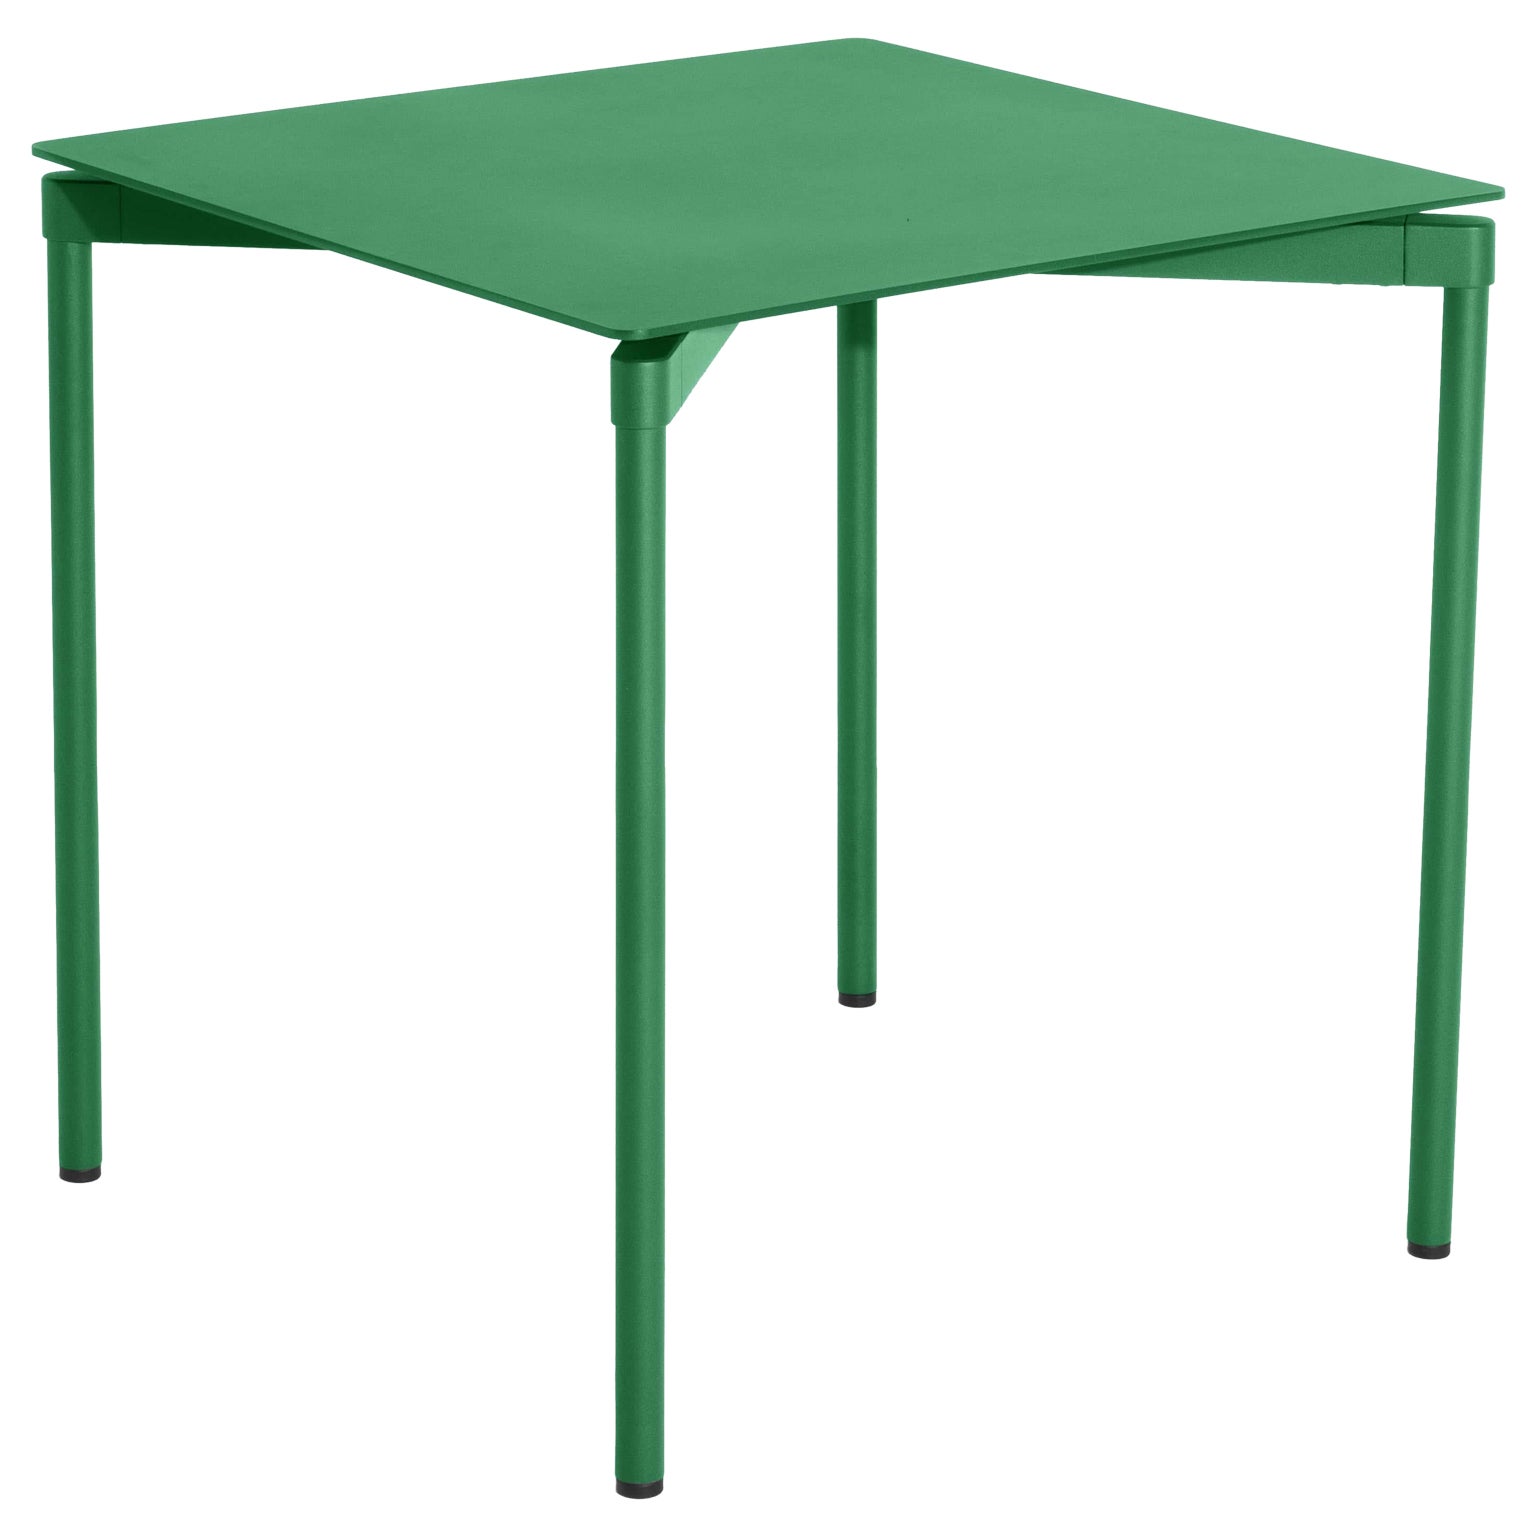 Petite Friture Fromme Square Table in Mint-Green Aluminium by Tom Chung